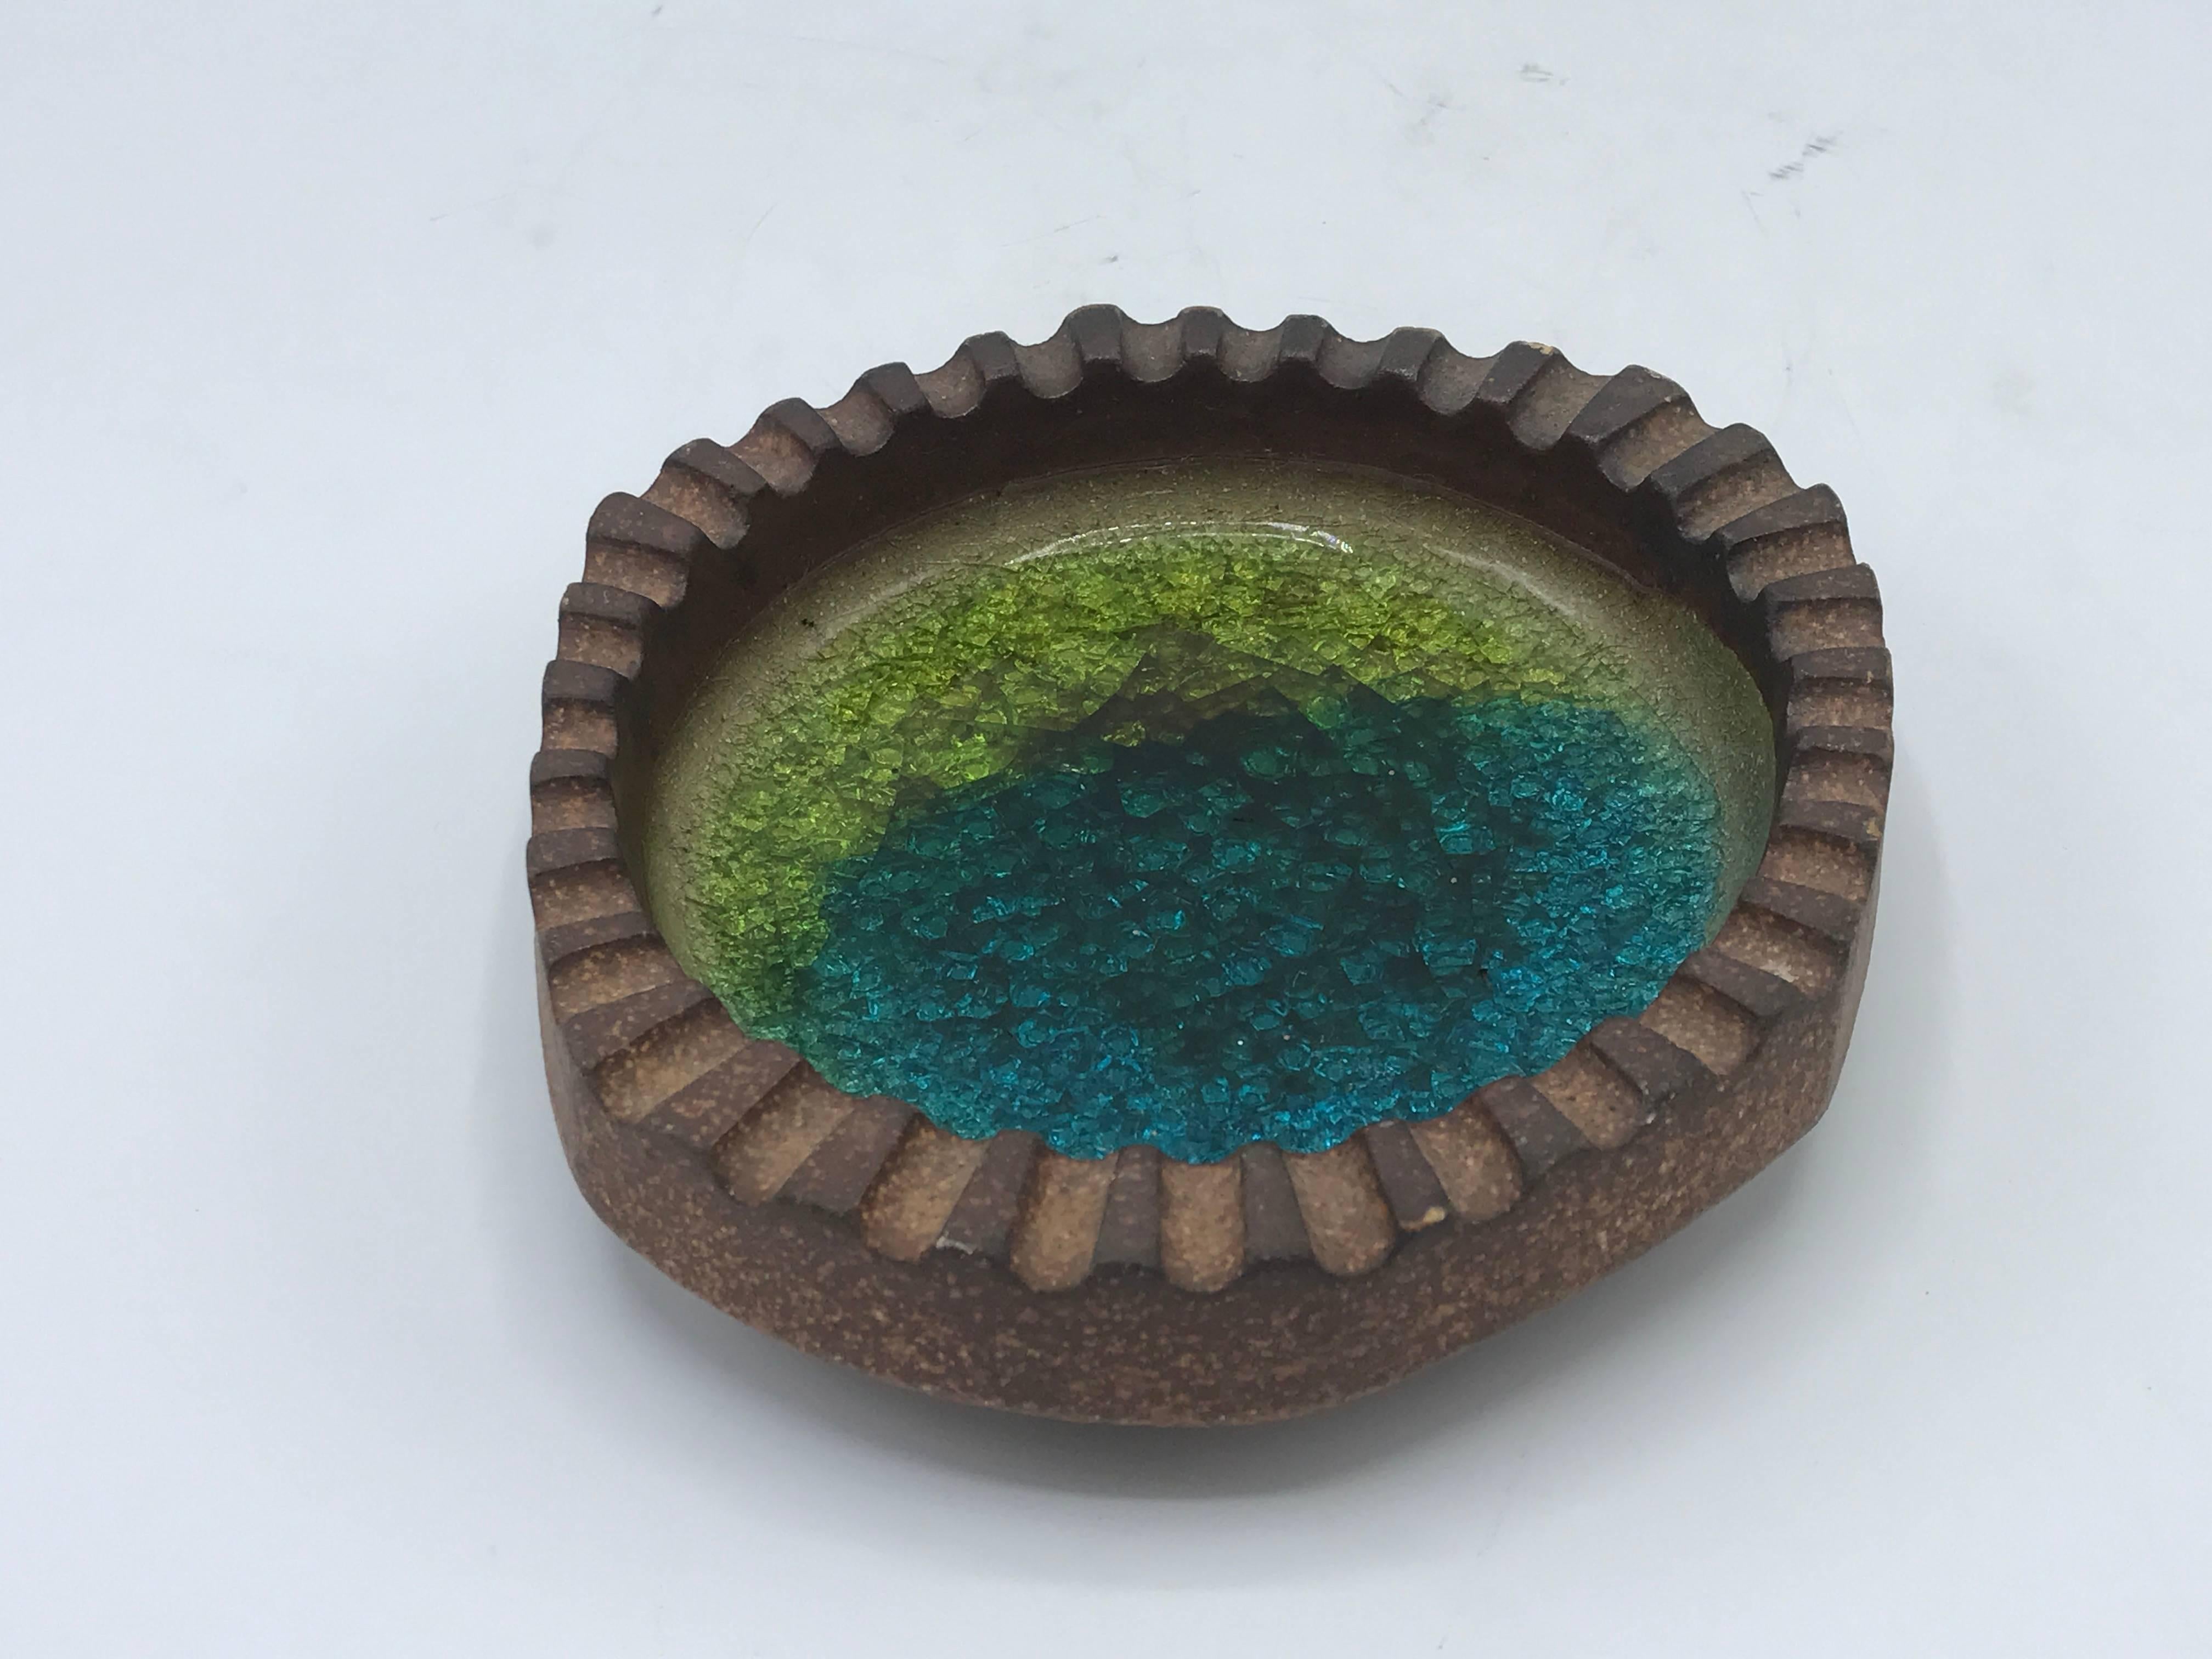 Offered is a stunning, 1970s Robert Maxwell pottery with blue and green glass ashtray catchall dish. Signed on backside.